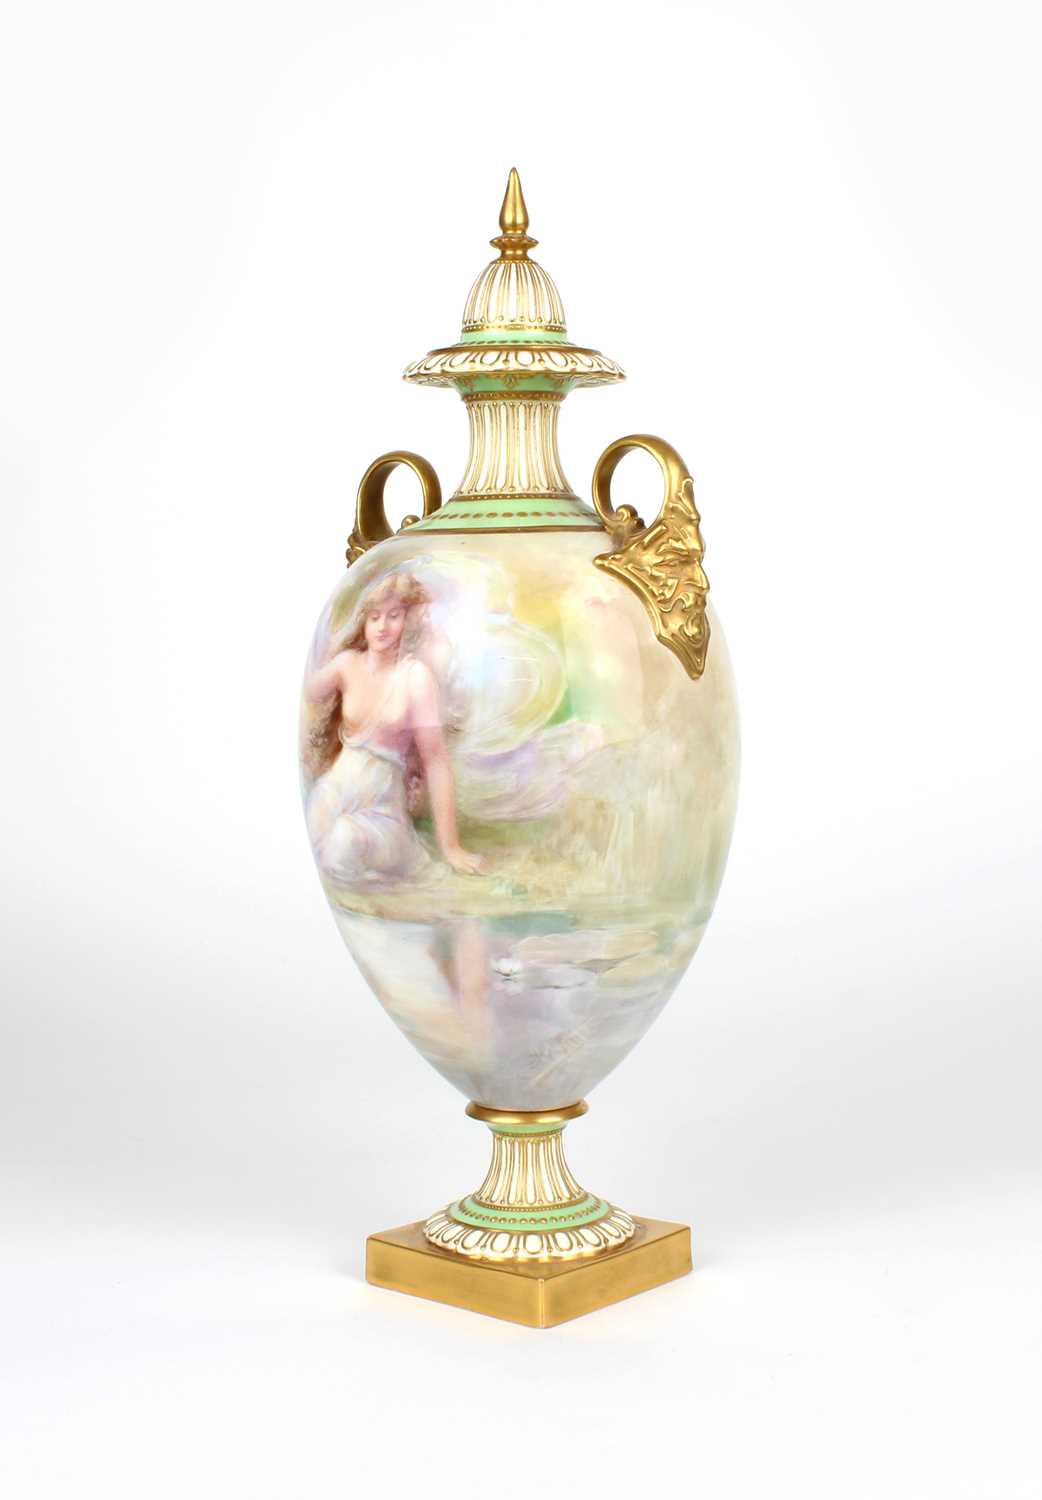 George White for Royal Doulton "Leda and the Swan" Urn - Image 2 of 20